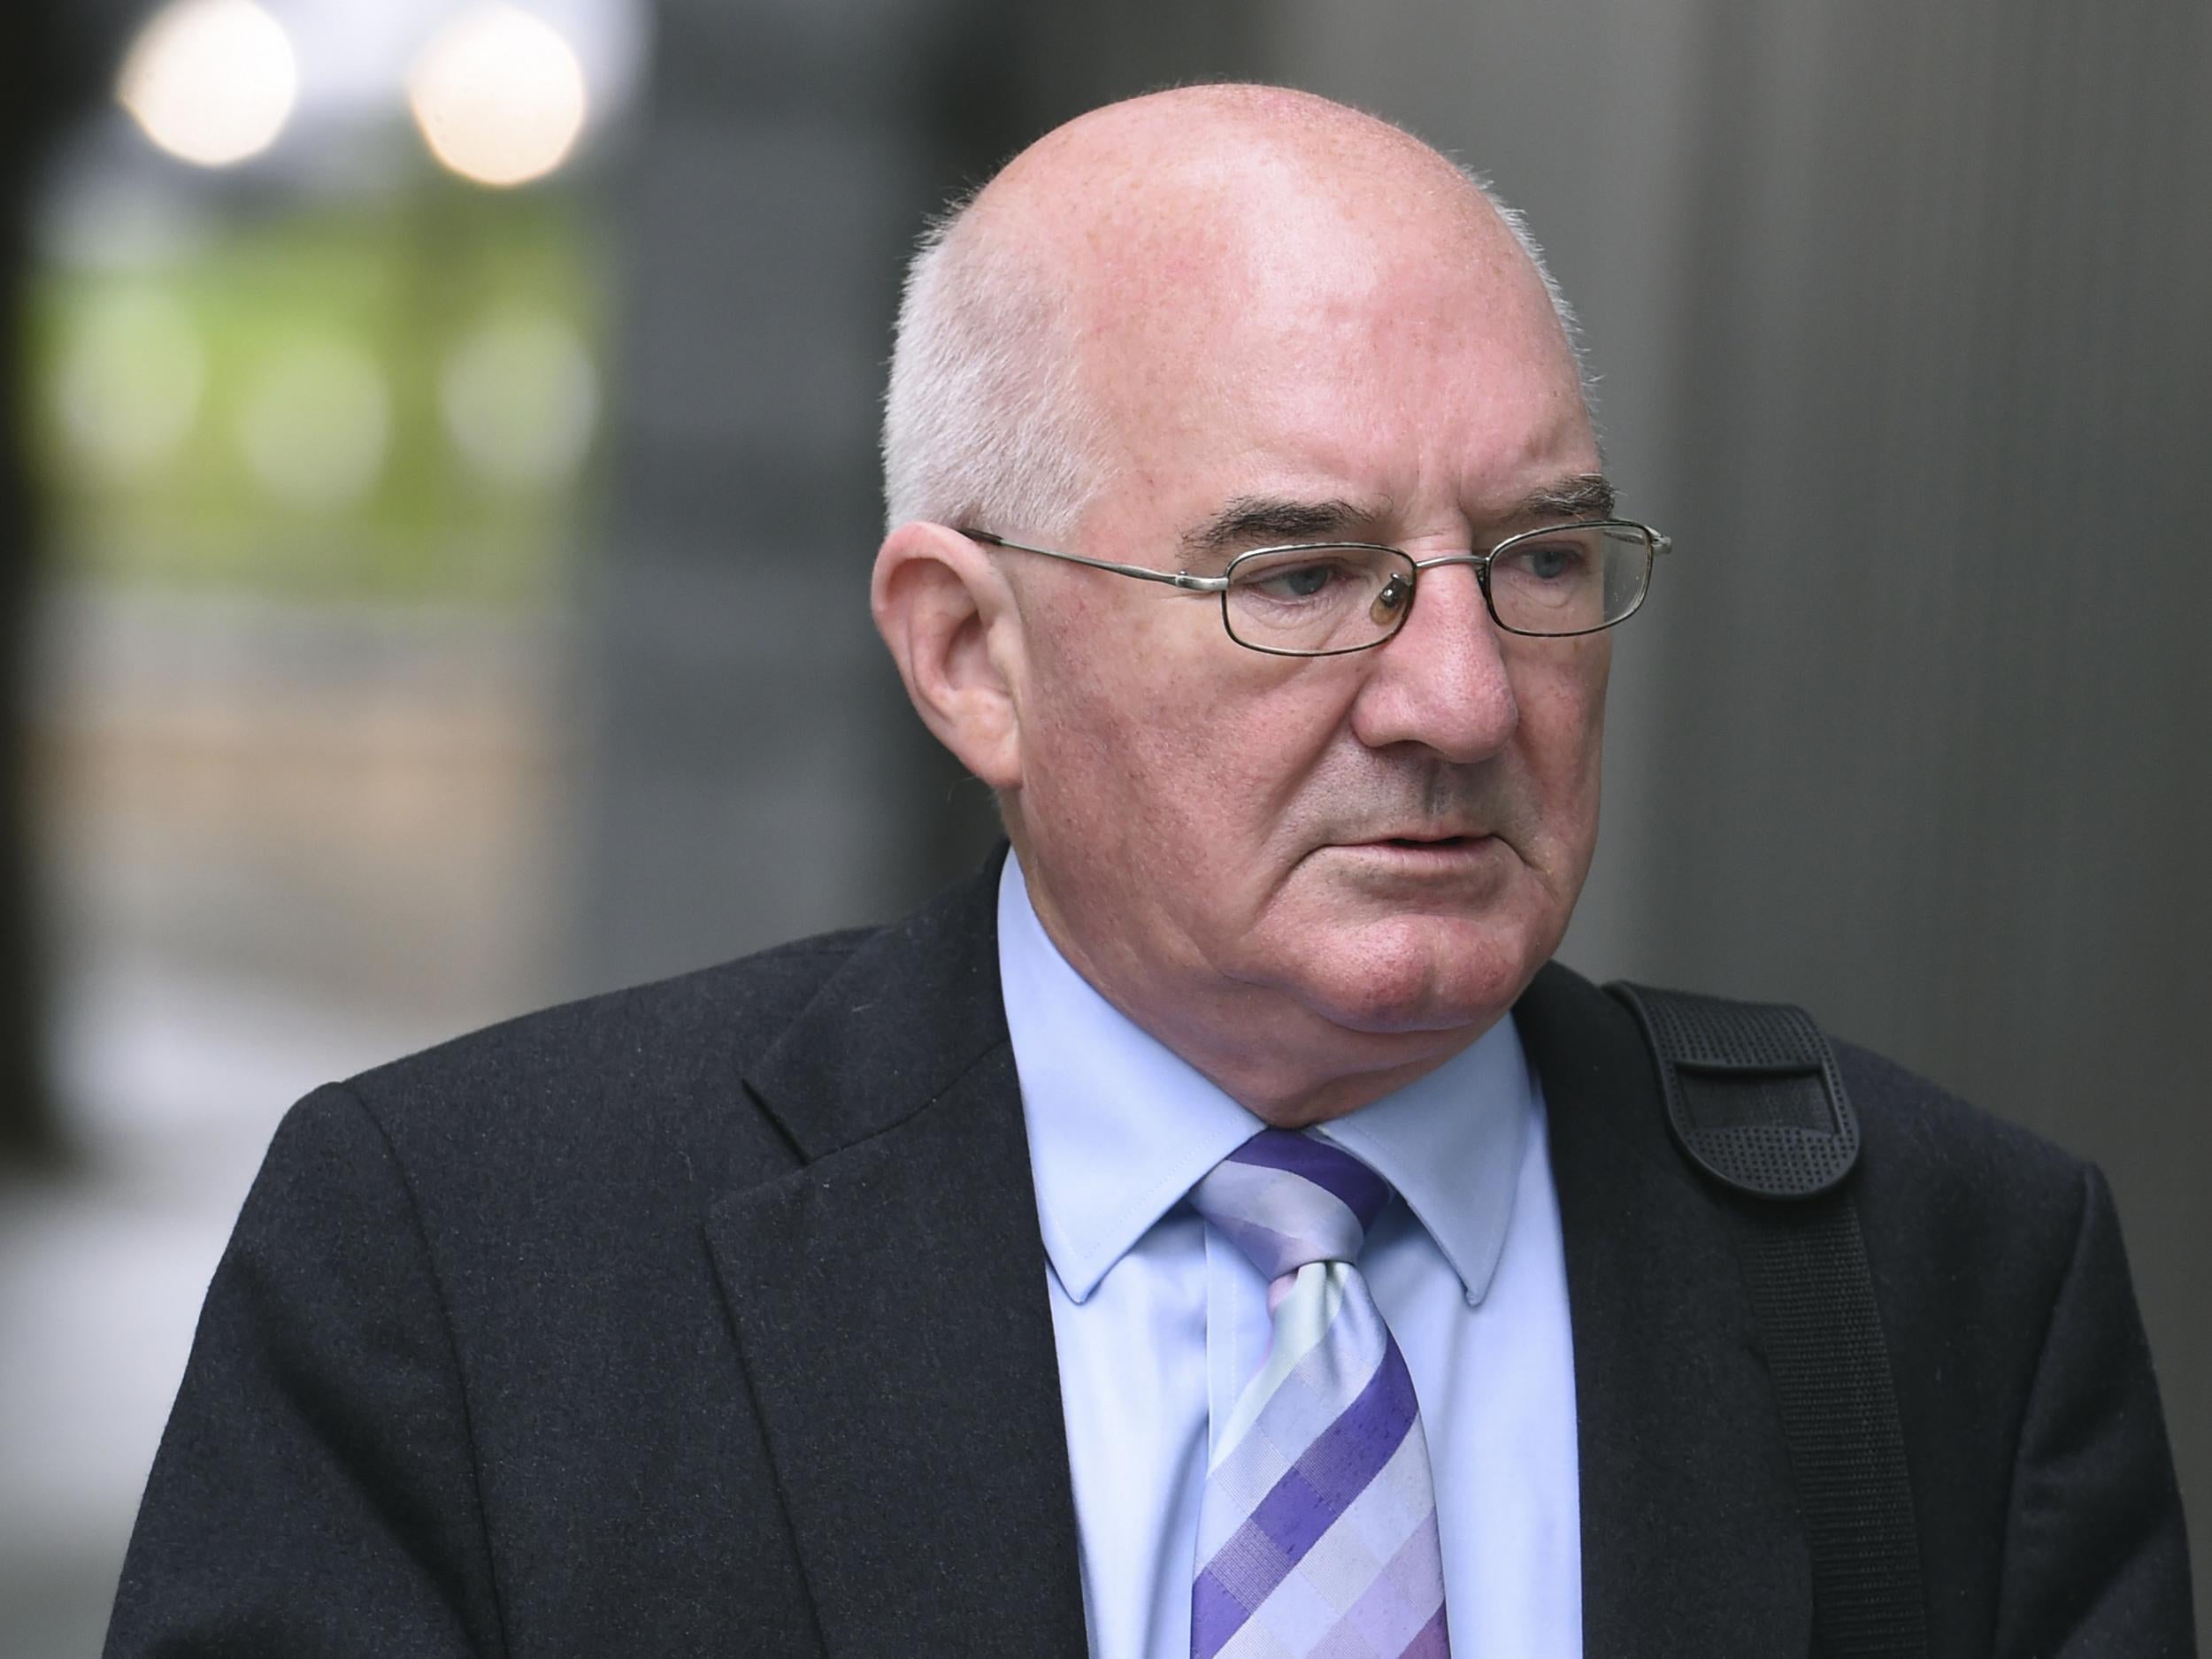 Former director of finance at Anglo Irish Bank, Willie McAteer, has been sentenced to three-and-a-half years in prison